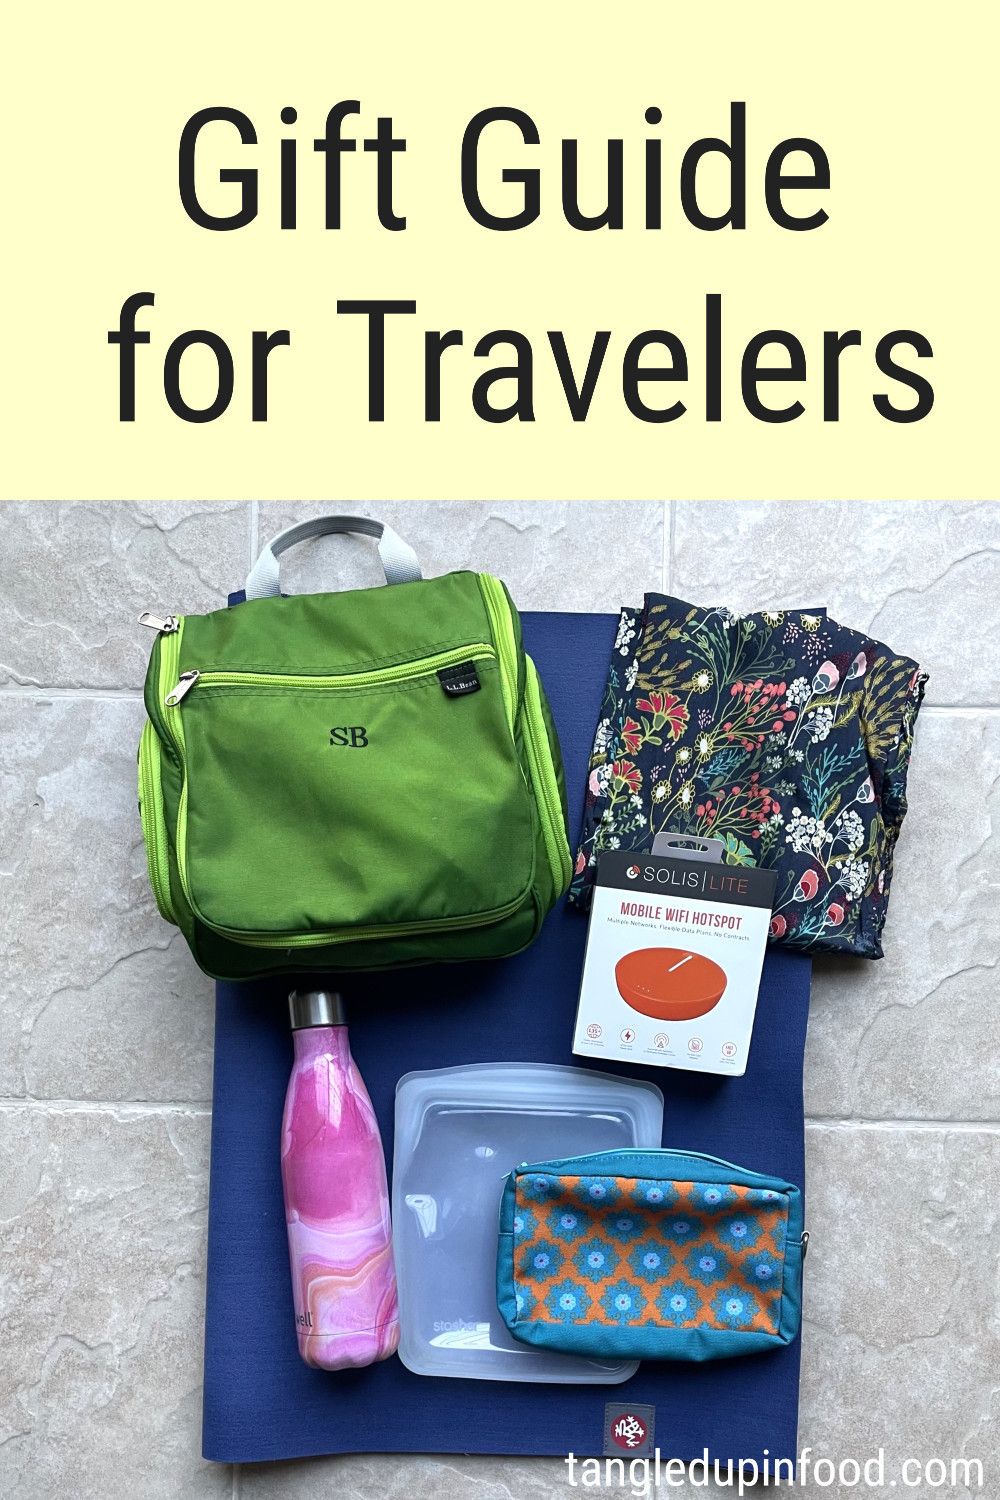 Top-down view of travel gift guide items